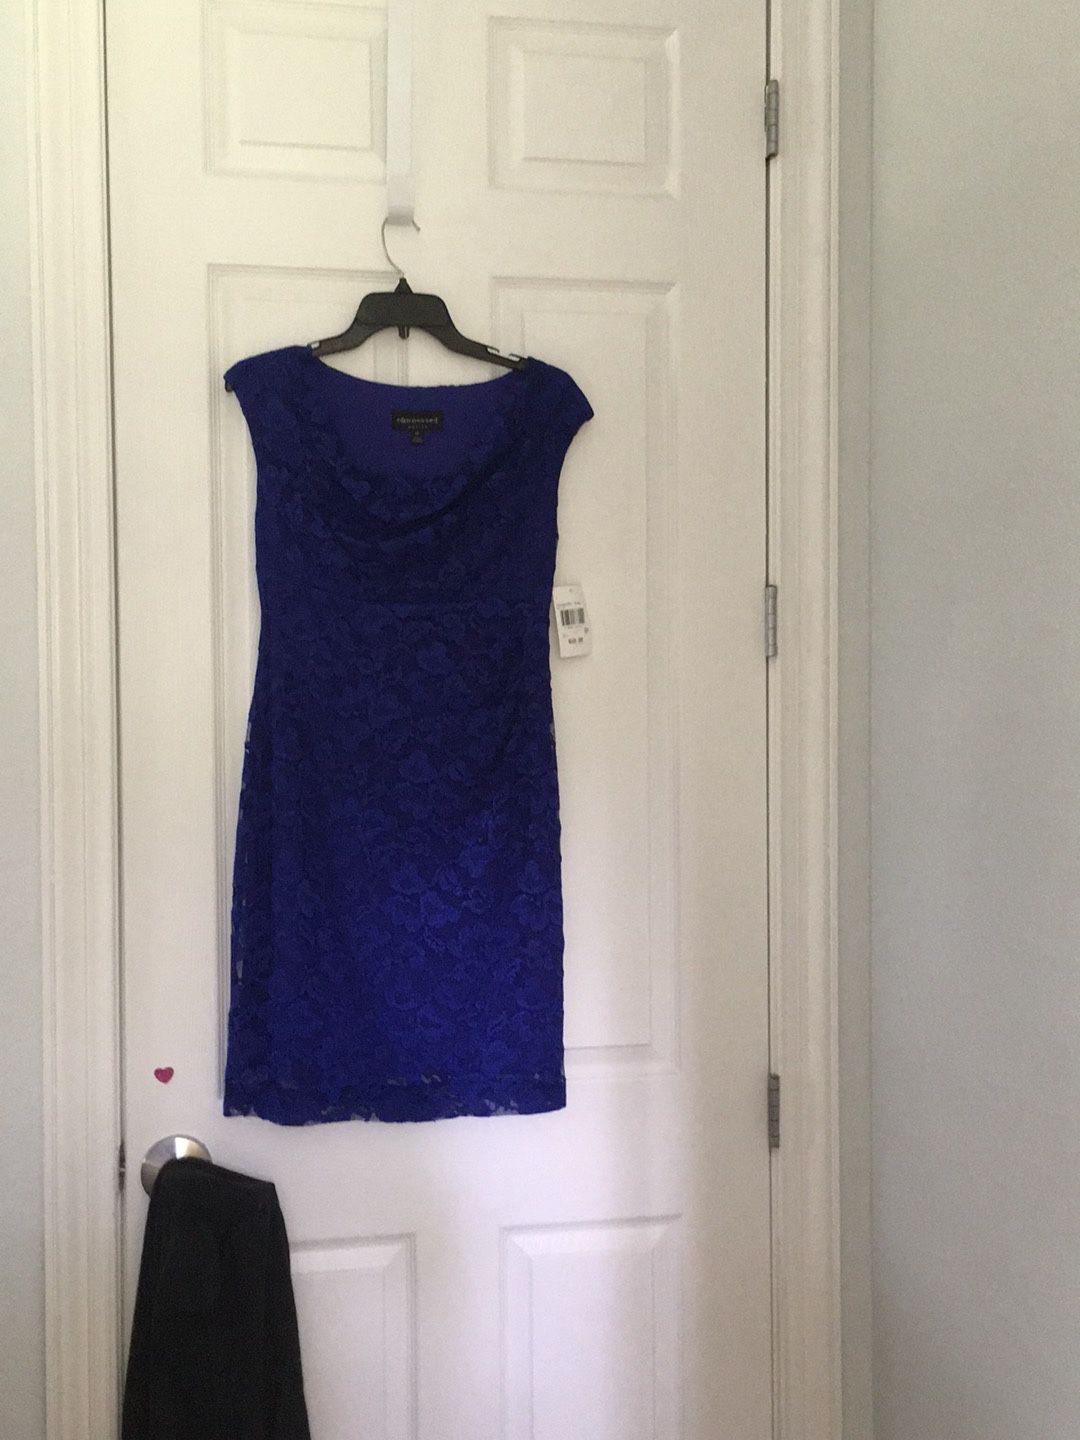 NWT Connect women’s Dress sz 6P royal blue lace PROM FORMAL WEDDING